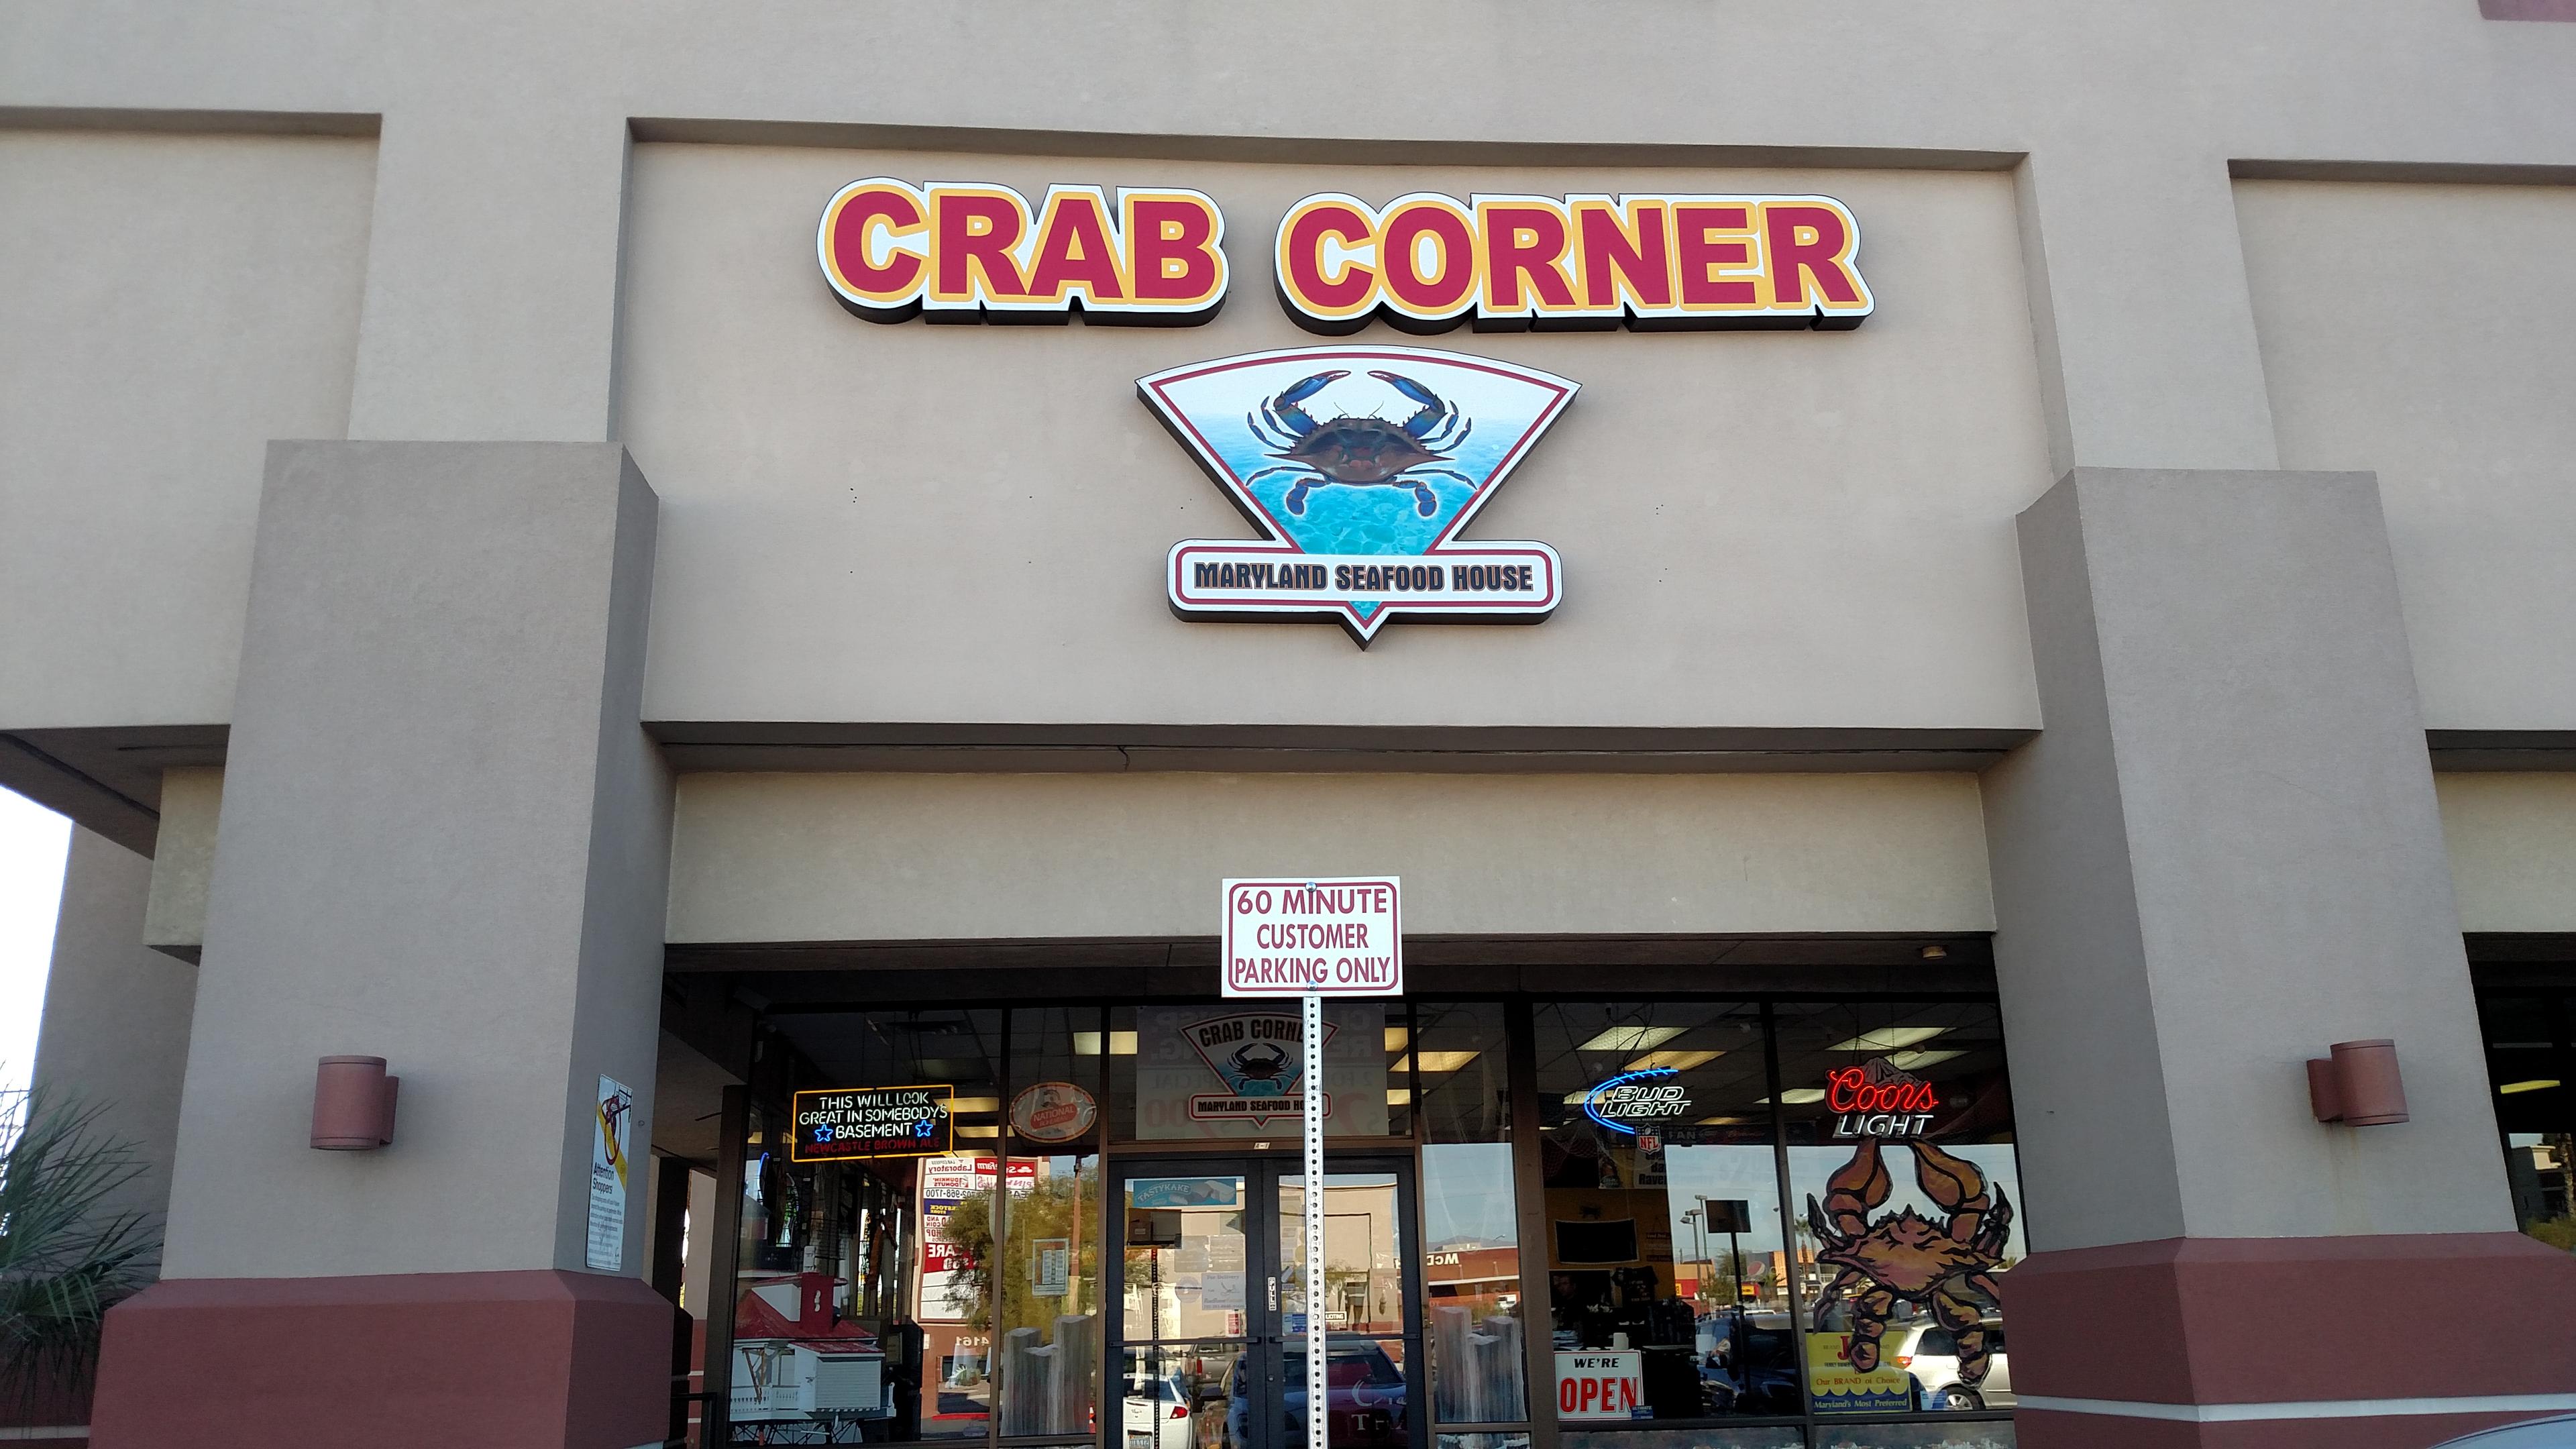 Cover image of this place Crab Corner